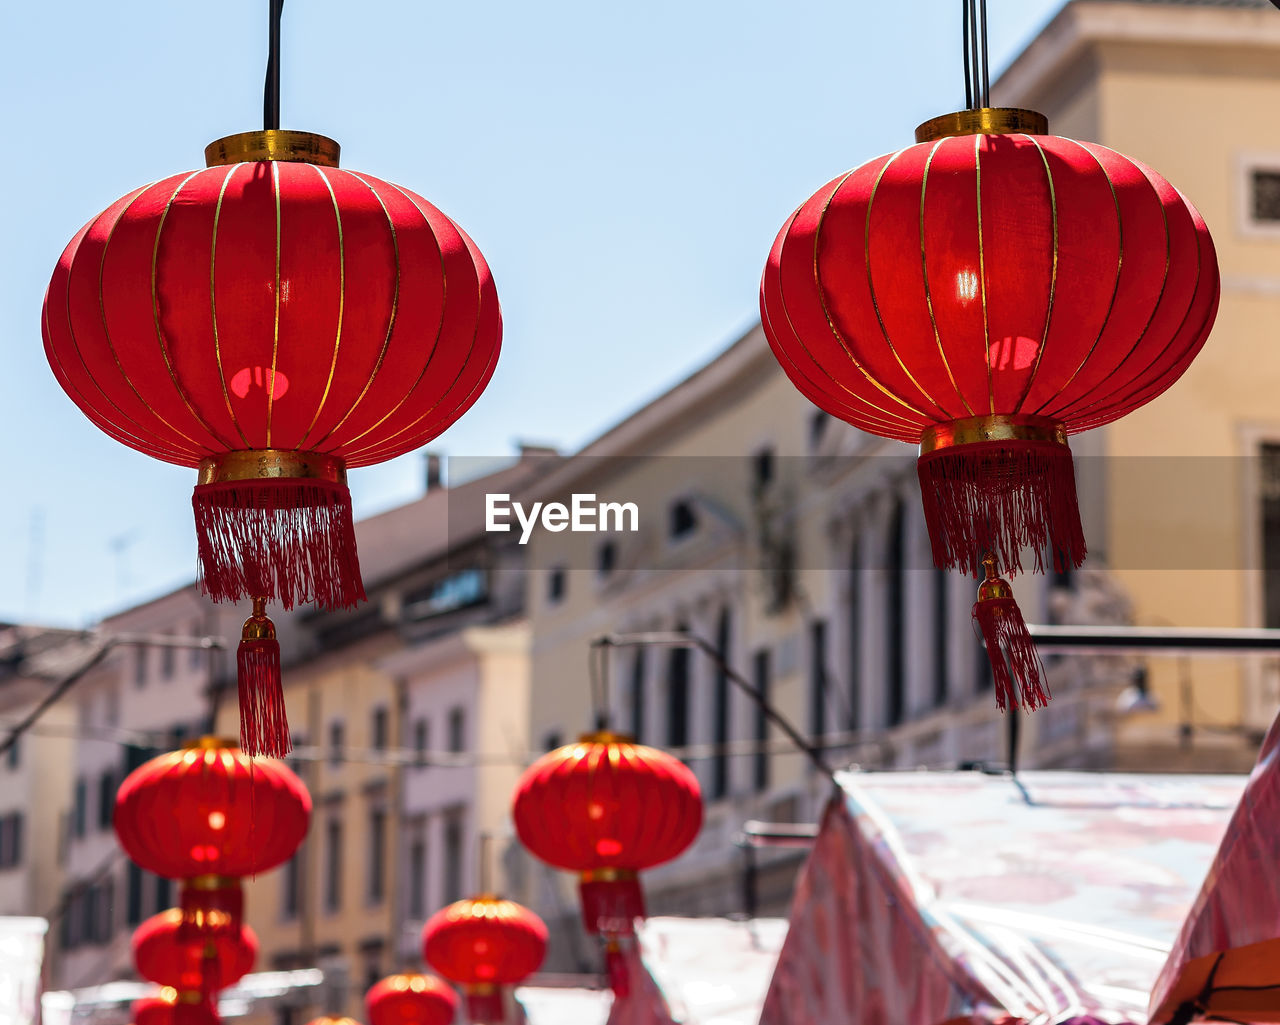 RED LANTERNS HANGING ON BUILDING AGAINST SKY